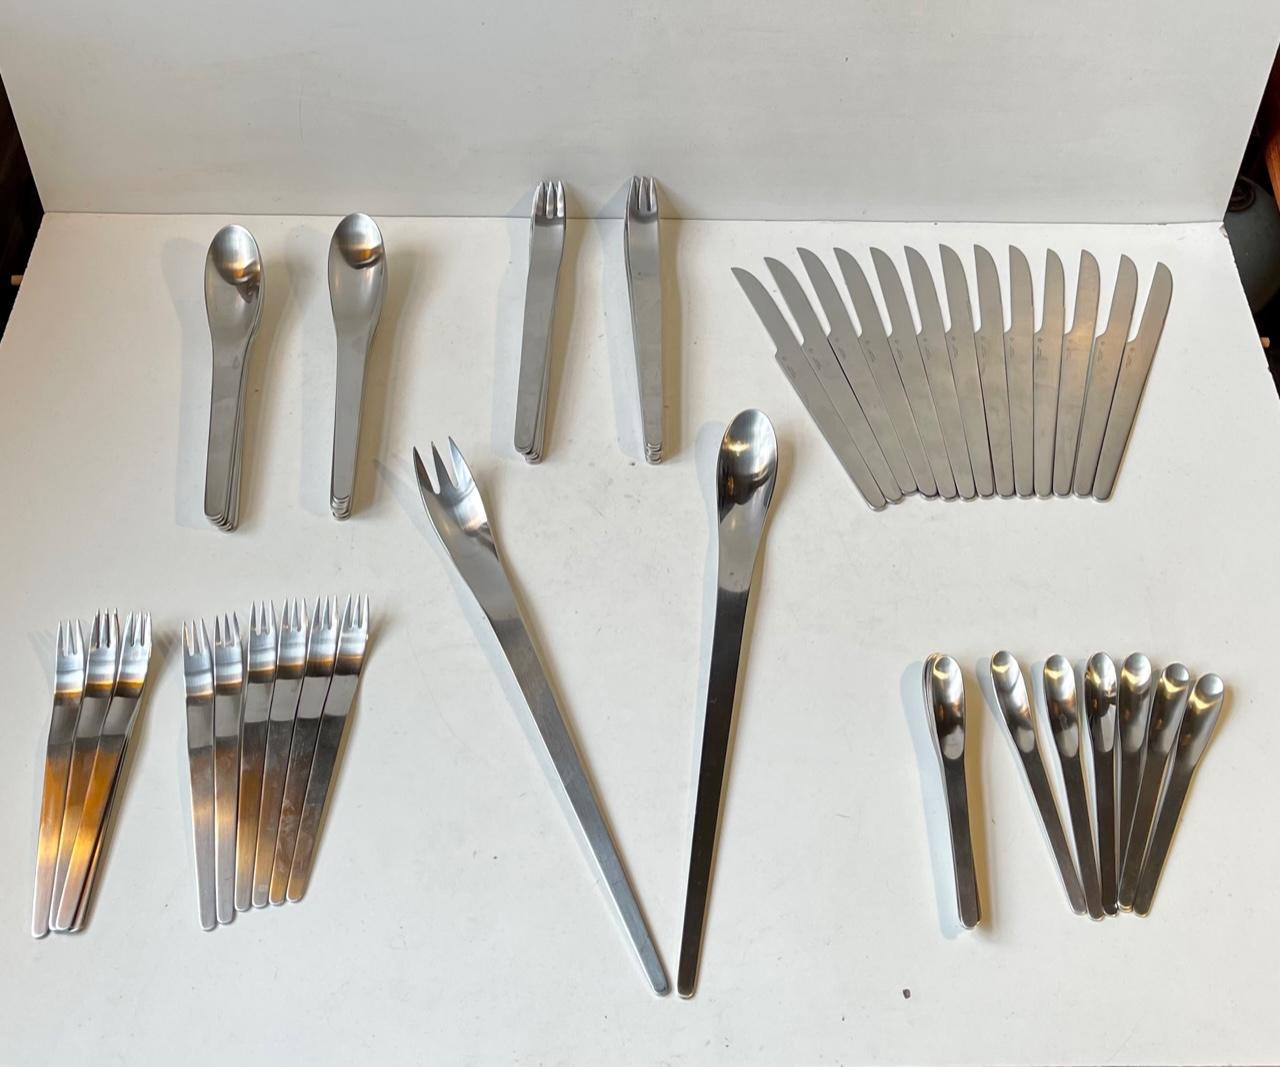 Complete flatware service for 12 persons designed by Arne Jacobsen and manufactured by Georg Jensen in Denmark. It was designed all the way back in 1957 for SAS Royal Hotel in Copenhagen. This set of 66 parts consists of: 13 dinner knives, 13 dinner